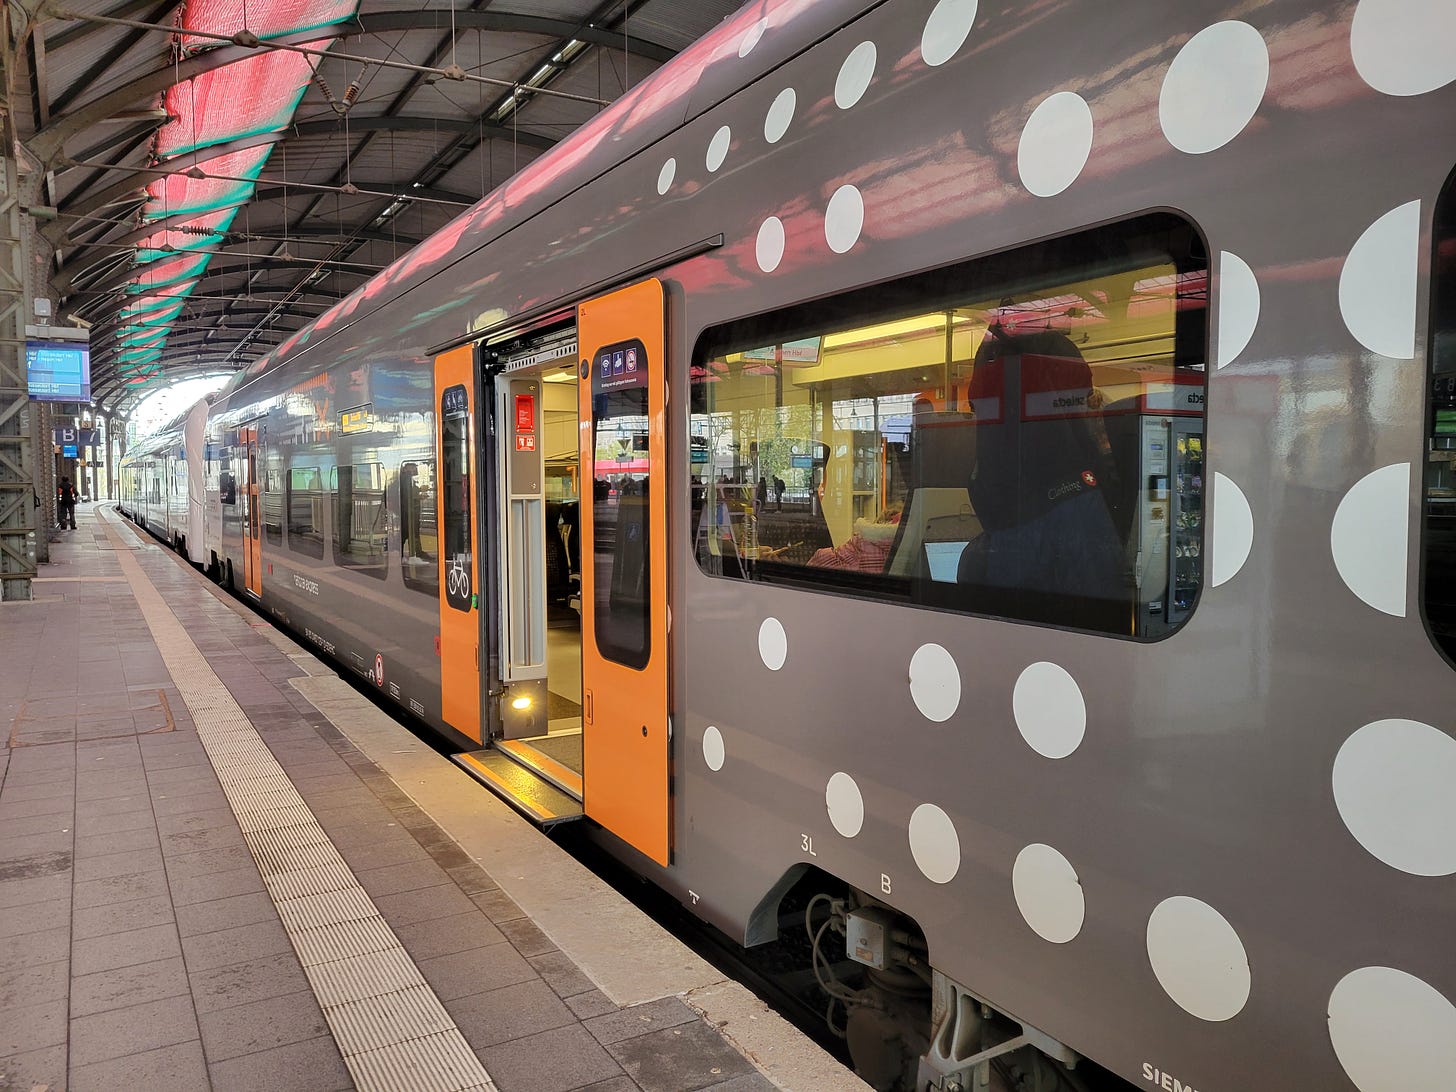 Gray metal passenger train with white dots and orange doors sits at a platform in the station.